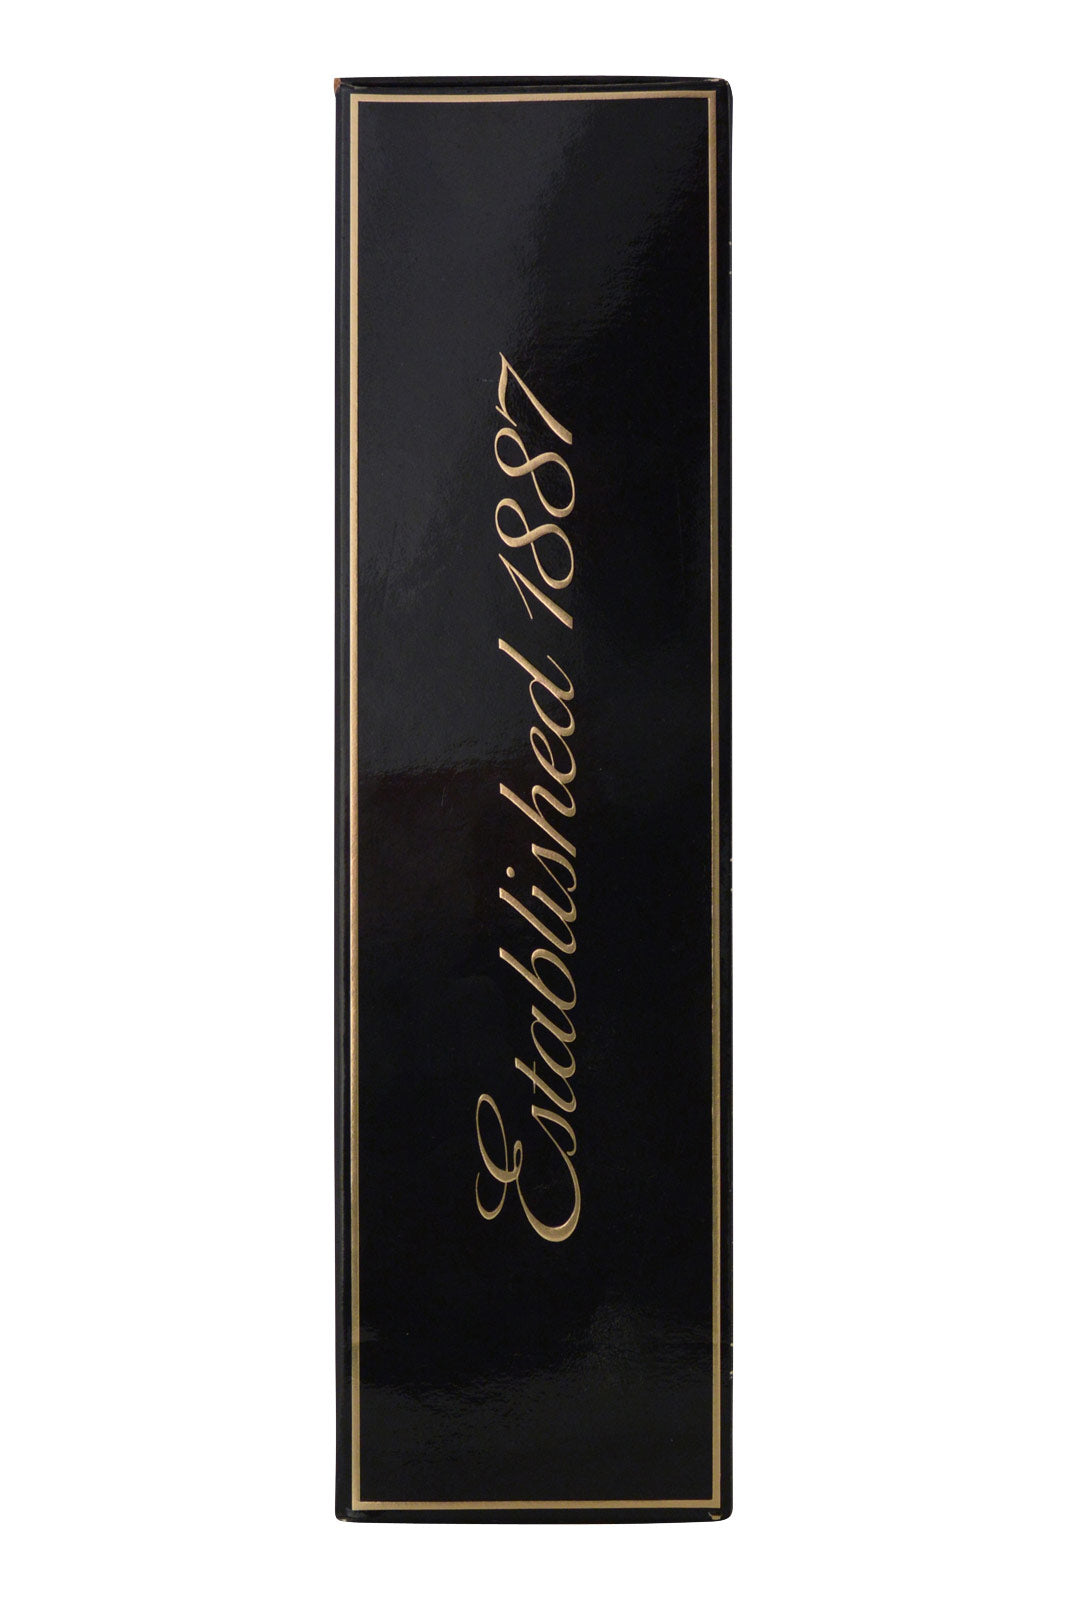 Glenfiddich Excellence 18 ans